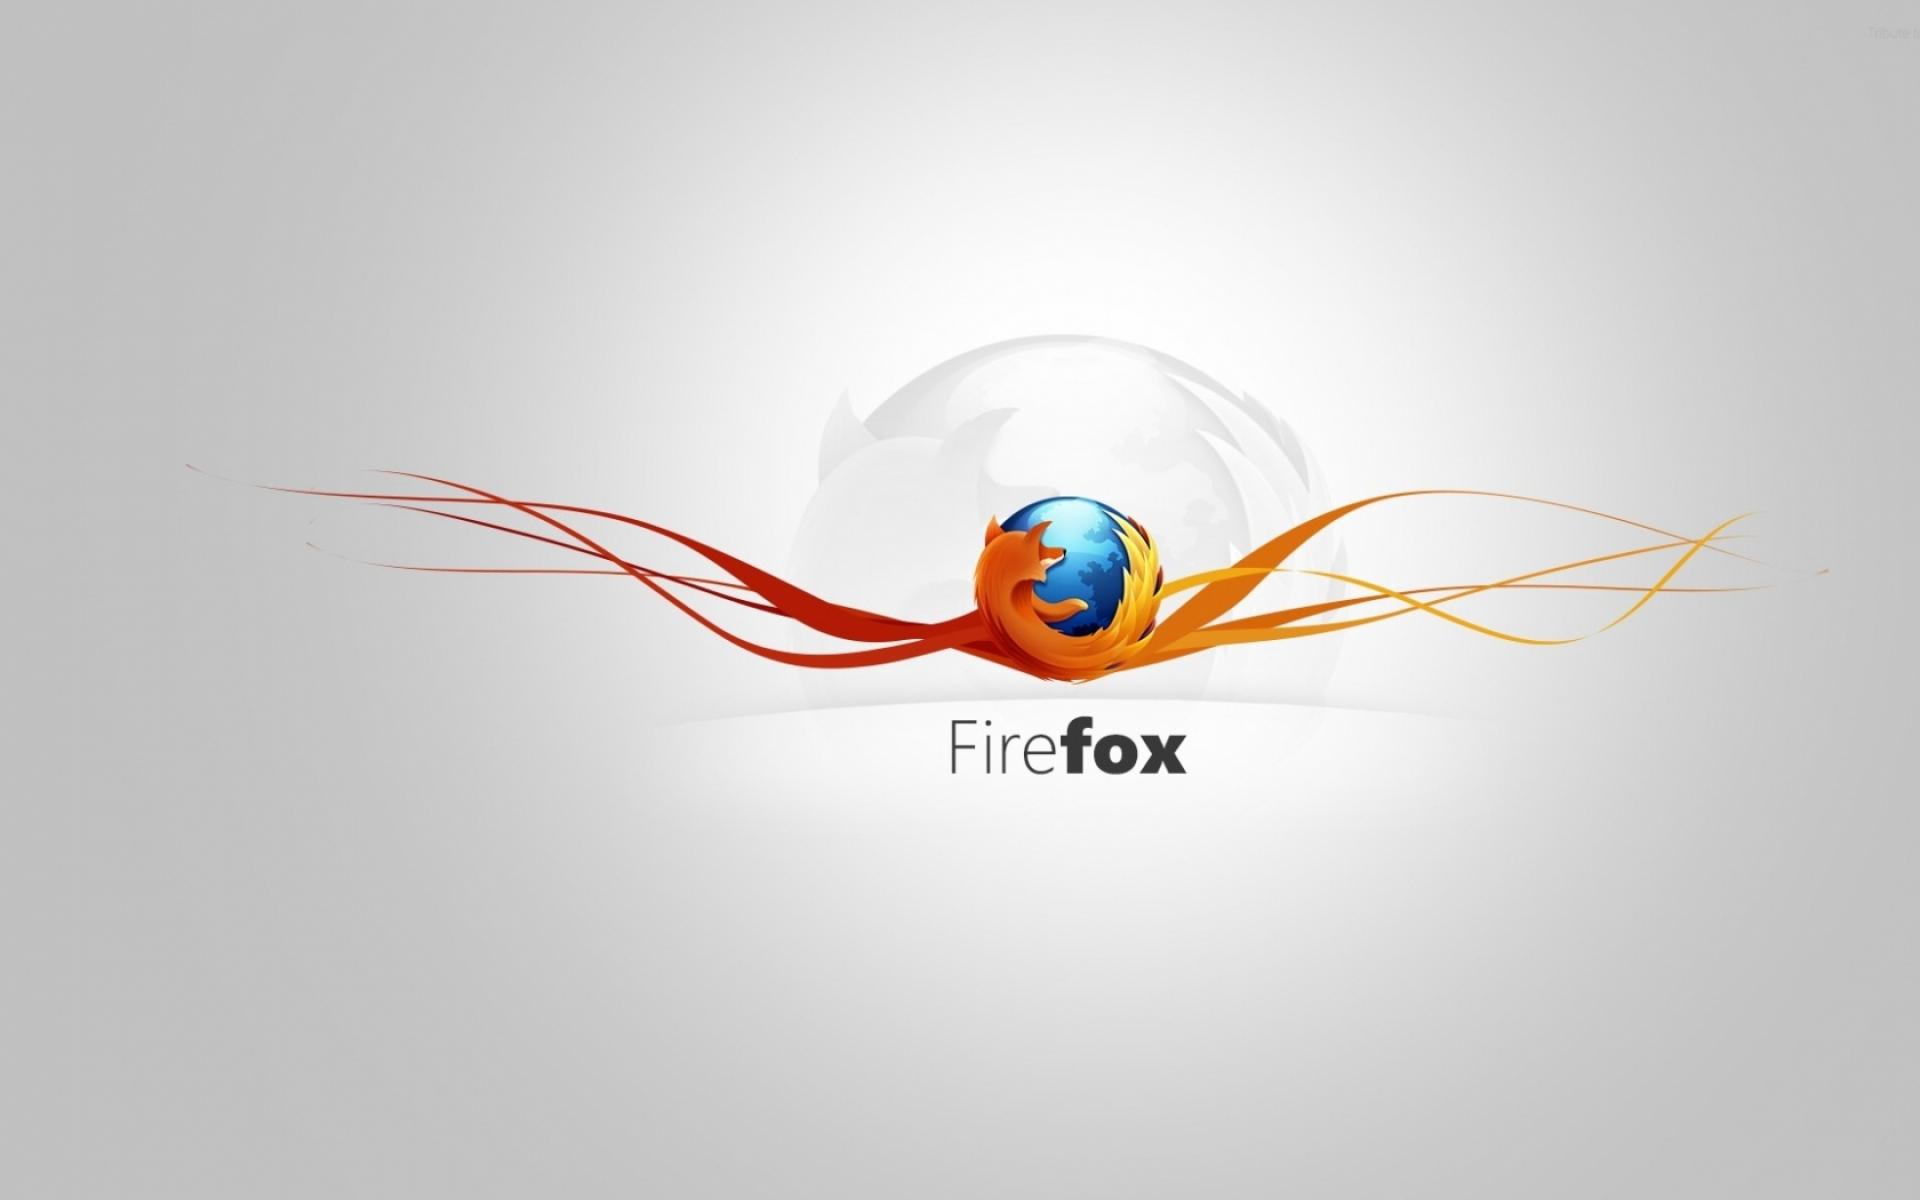 Firefox Wallpaper For Free Download In High Definition